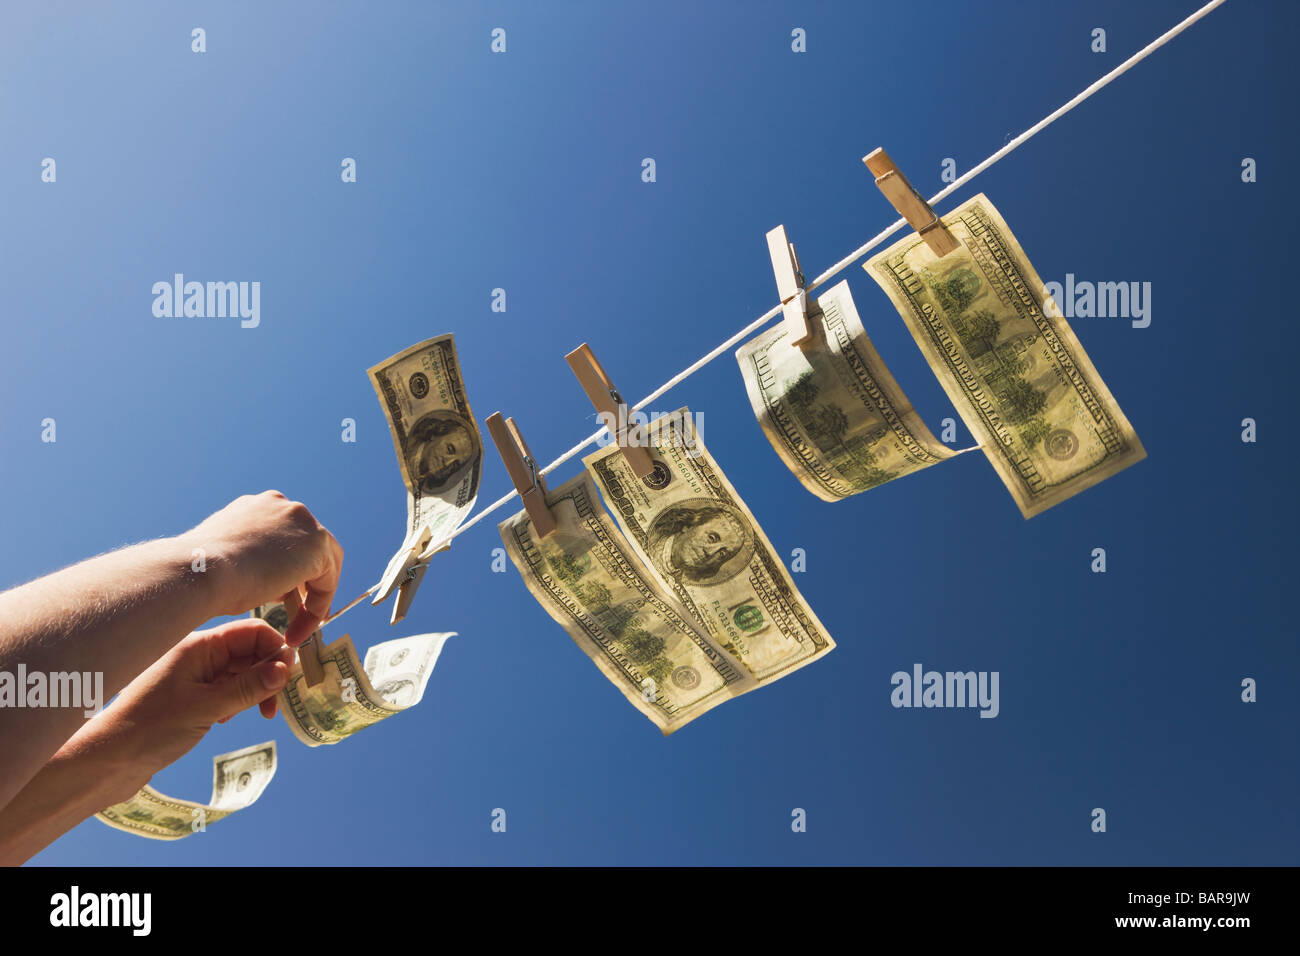 Money Laundering: Hands pinning out $100 dollar bills to dry in the wind under a deep blue sky. Stock Photo